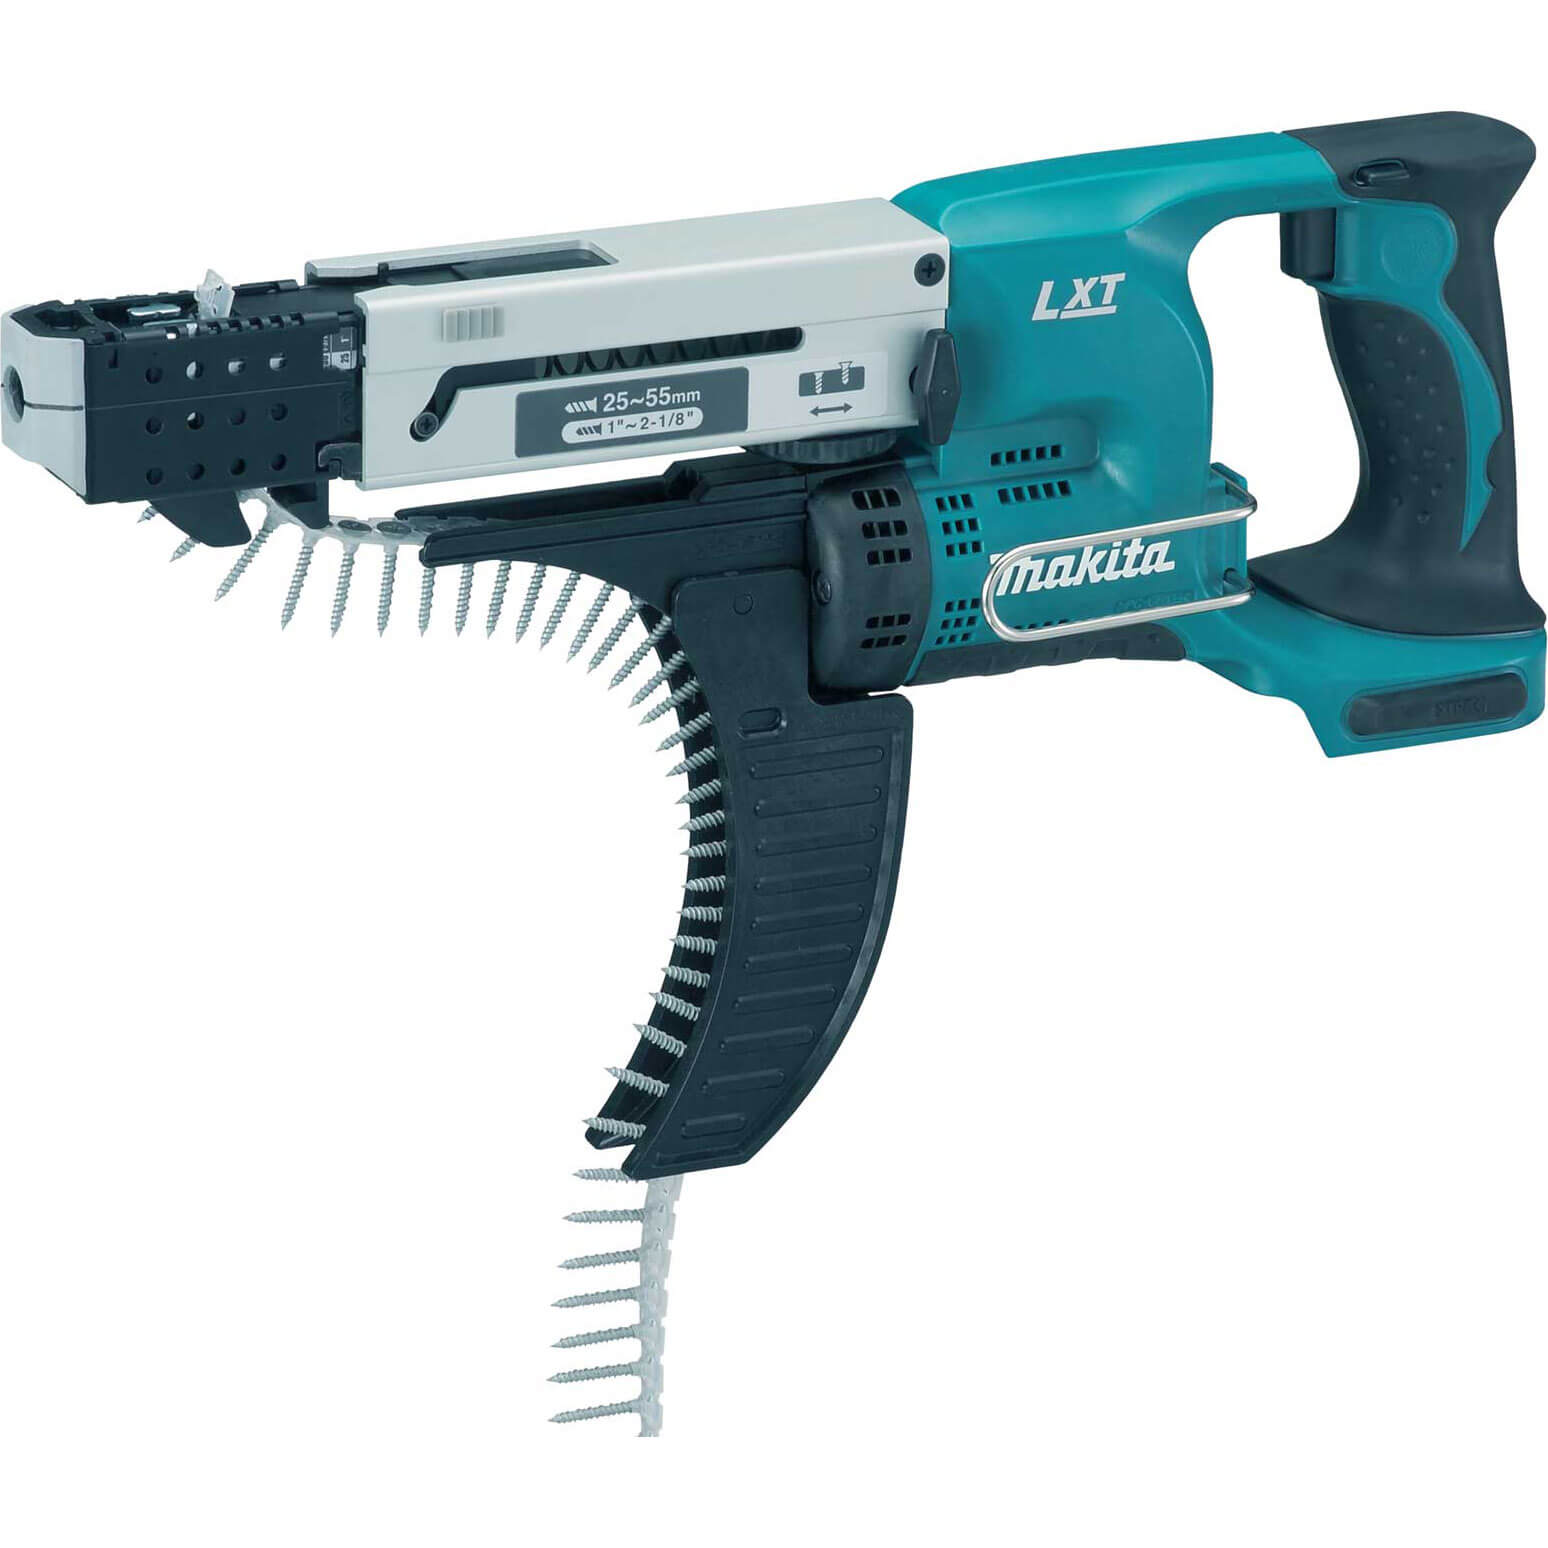 Photo of Makita Dfr550 18v Cordless Lxt Auto Feed Screwdriver No Batteries No Charger No Case